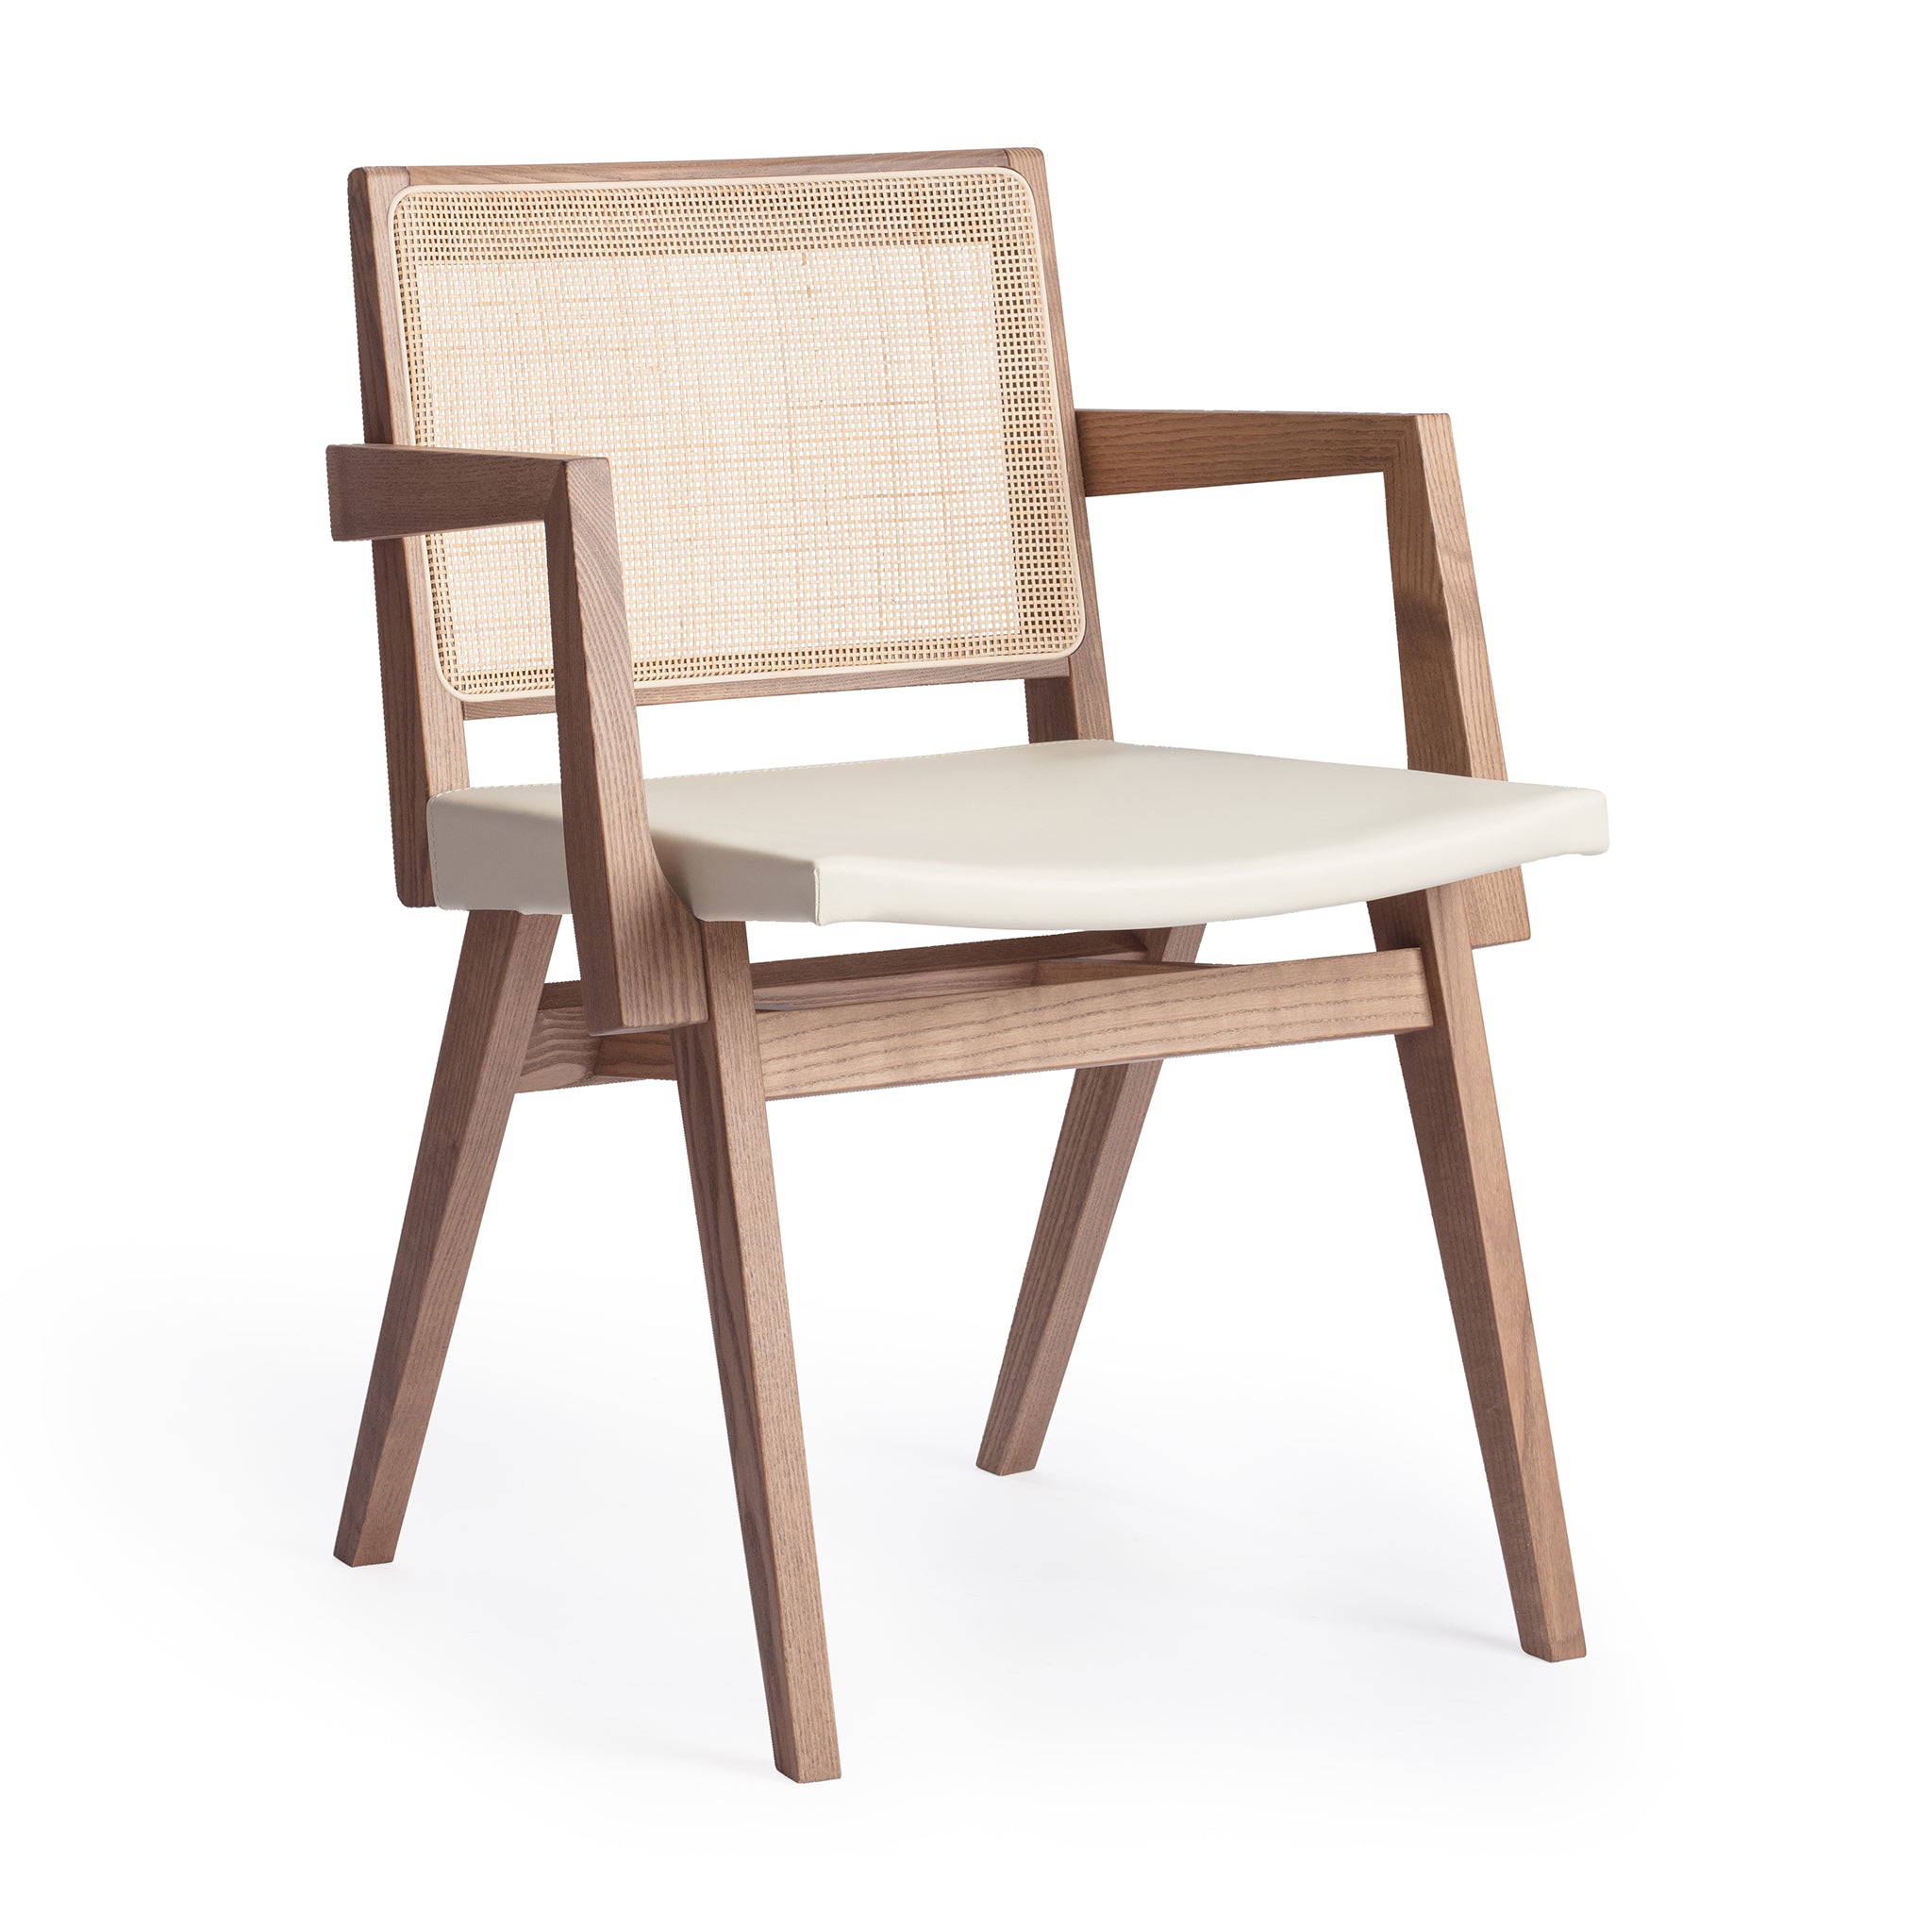 Main view of an "Elye" designer dining chair, walnut stained ash frame, square weave cane back, contract grade off white leather seat, produced by Klarel in Italy. #K40-1